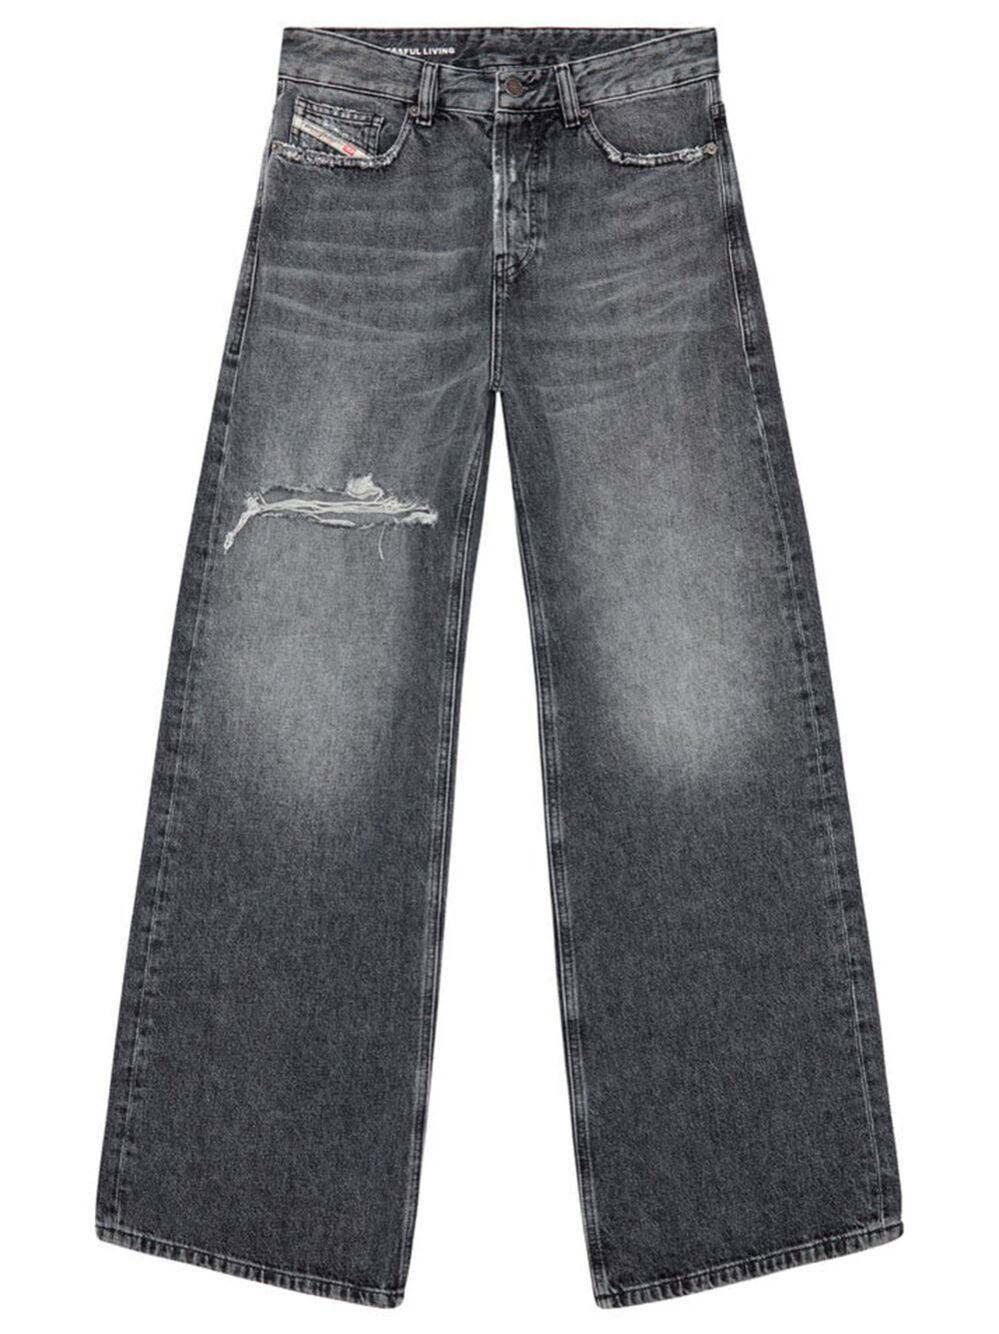 Straight jeans 1996 d-sire 007x4 - 1